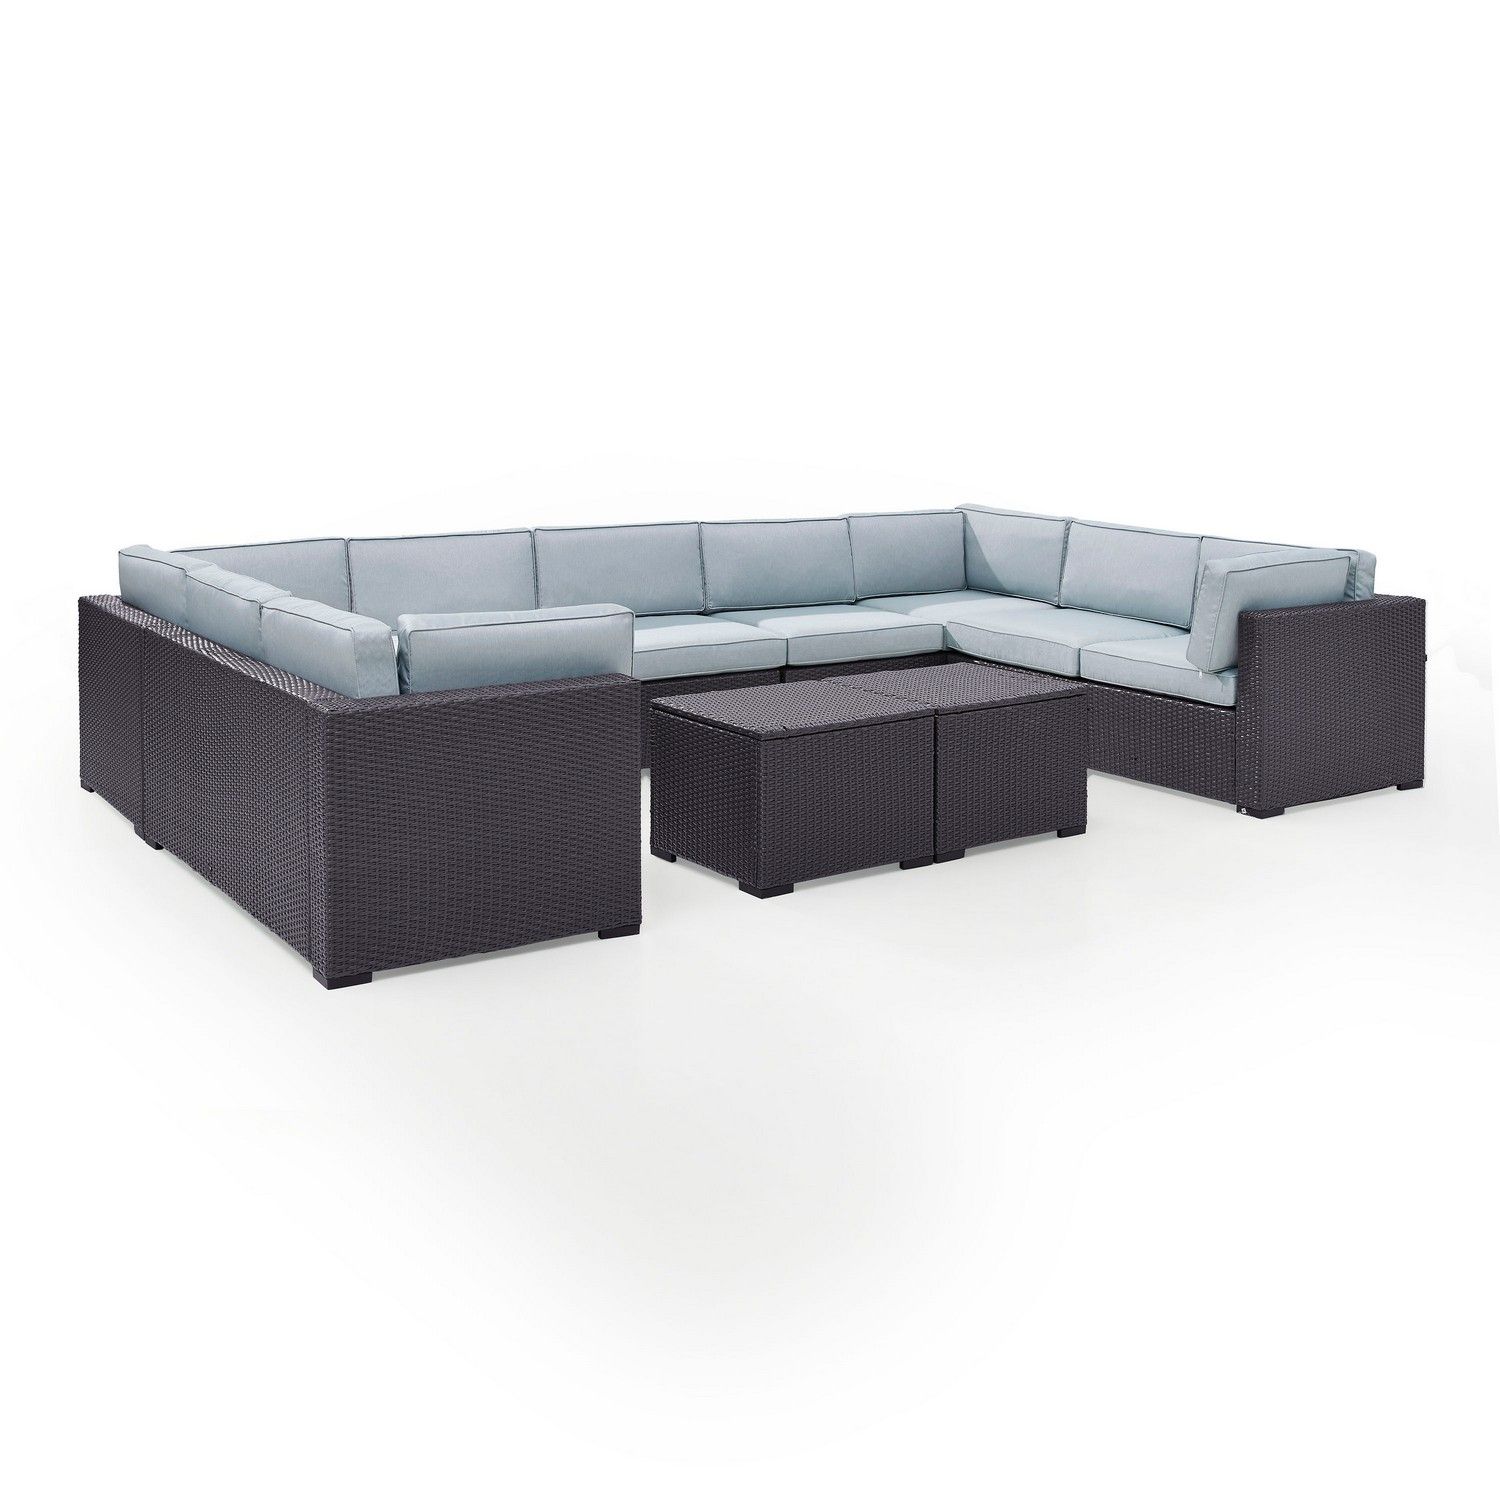 Crosley Biscayne 7-PC Outdoor Wicker Sectional Set - 4 Loveseats, Armless Chair, 2 Coffee Tables - Mist/Brown